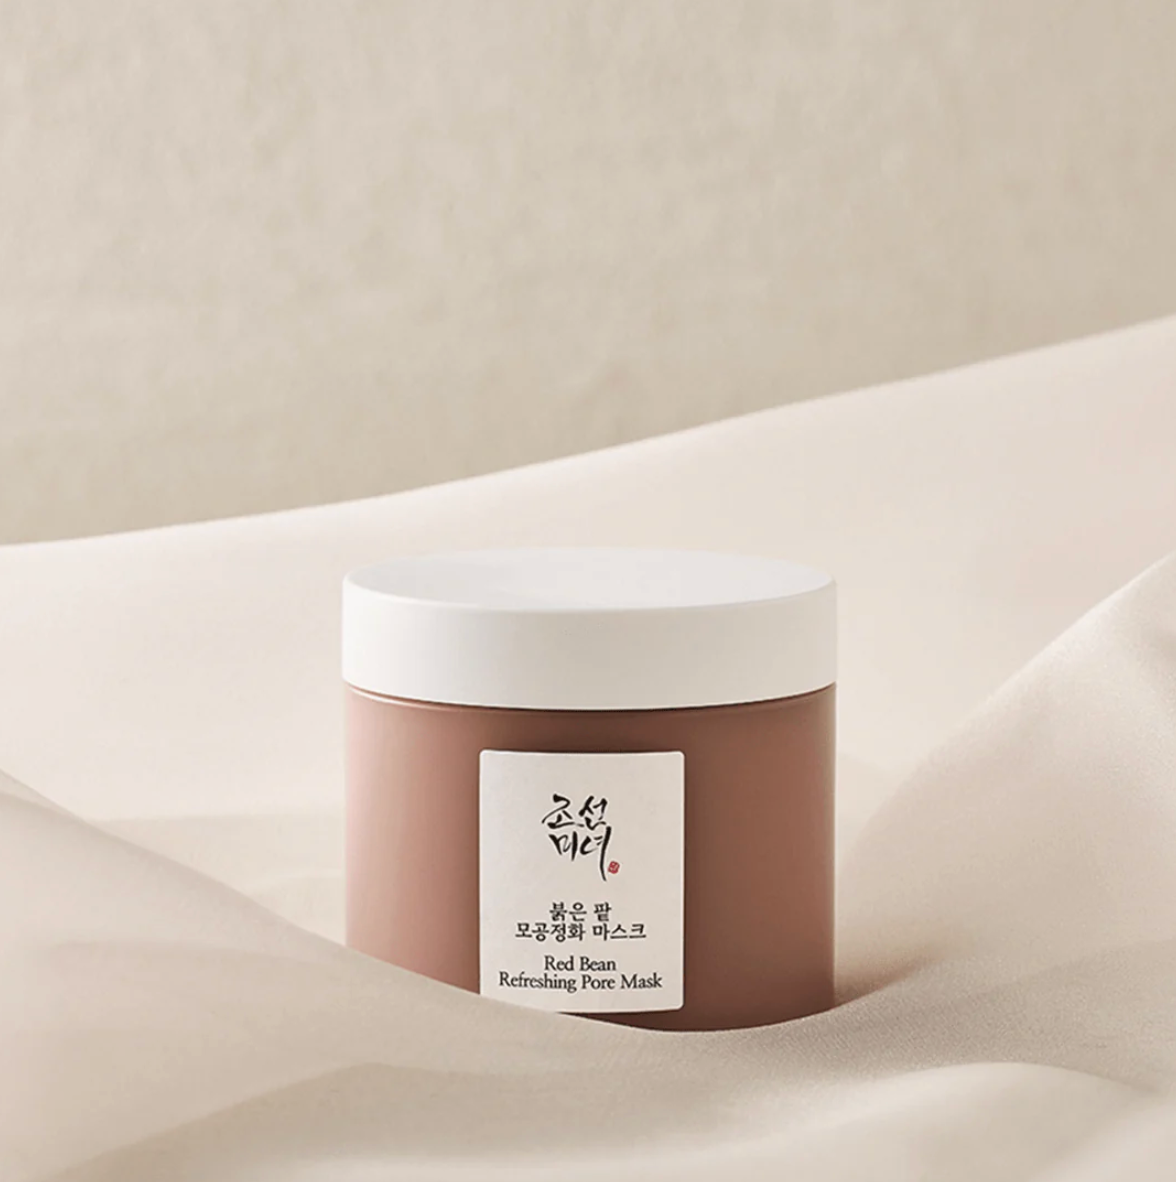 Beauty of Jaseon Red Bean Refreshing Pore Mask Face Mask Beauty of jaseon   